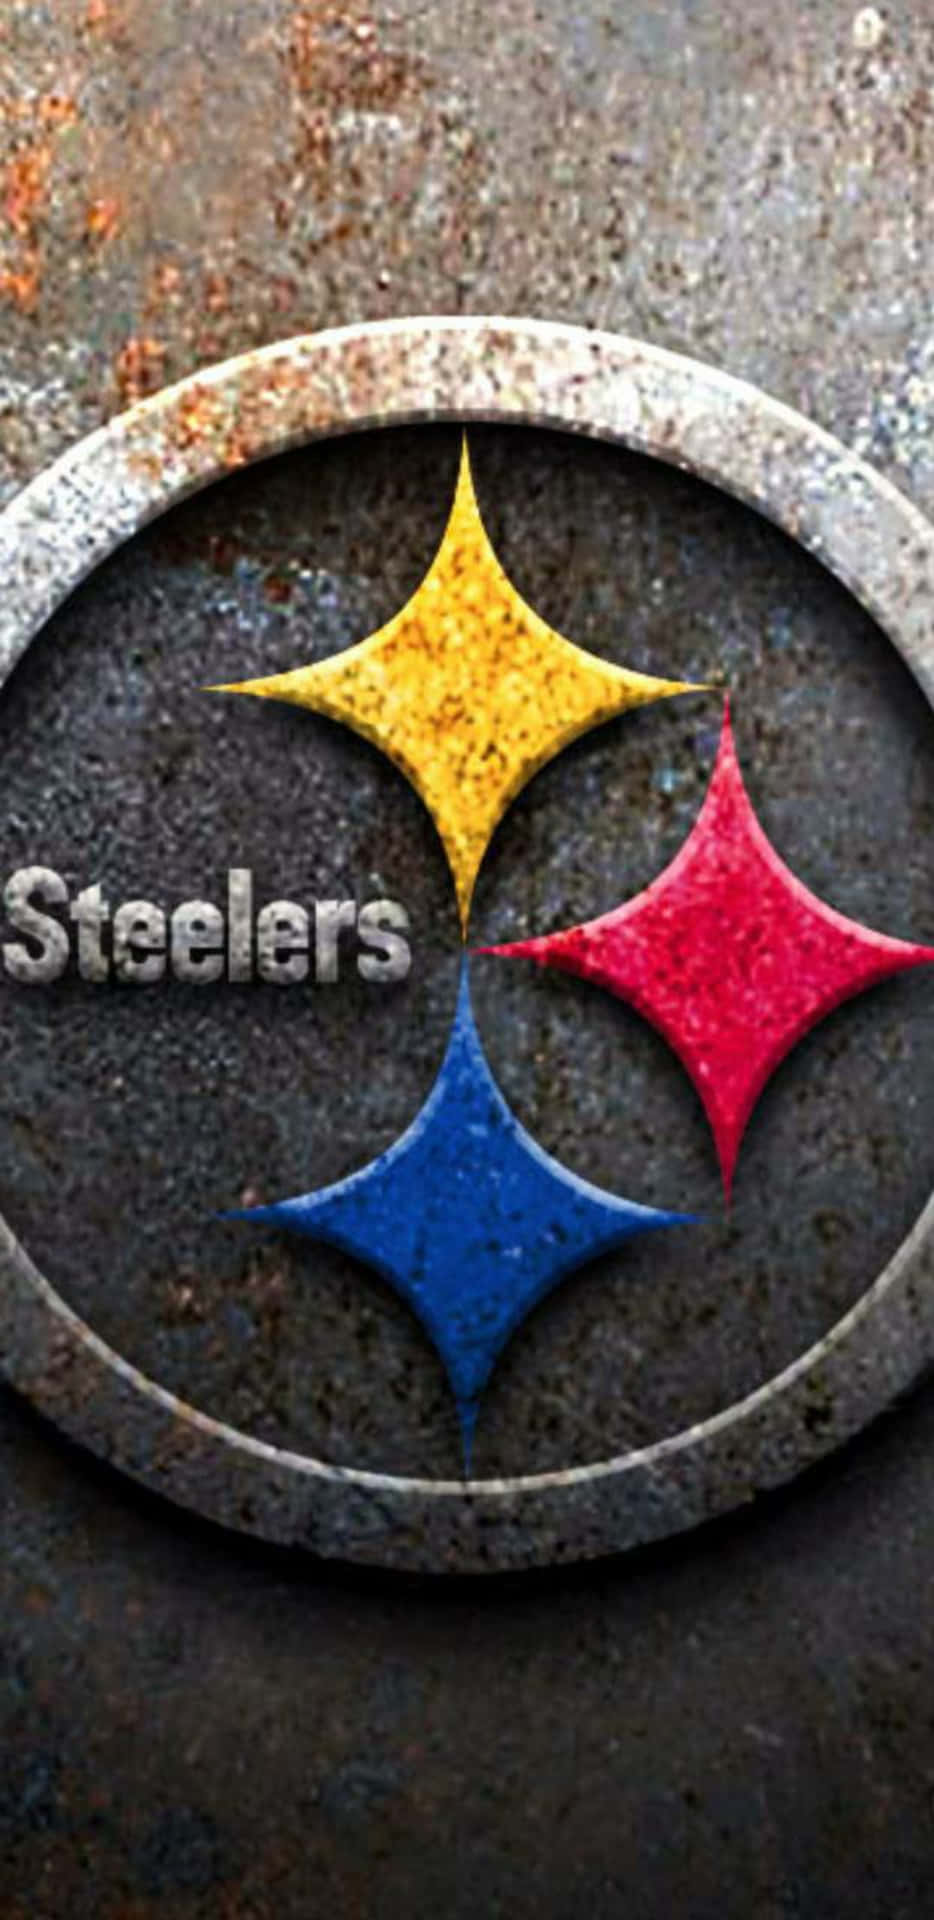 Show Everyone Who You Support With This Steelers Phone Background